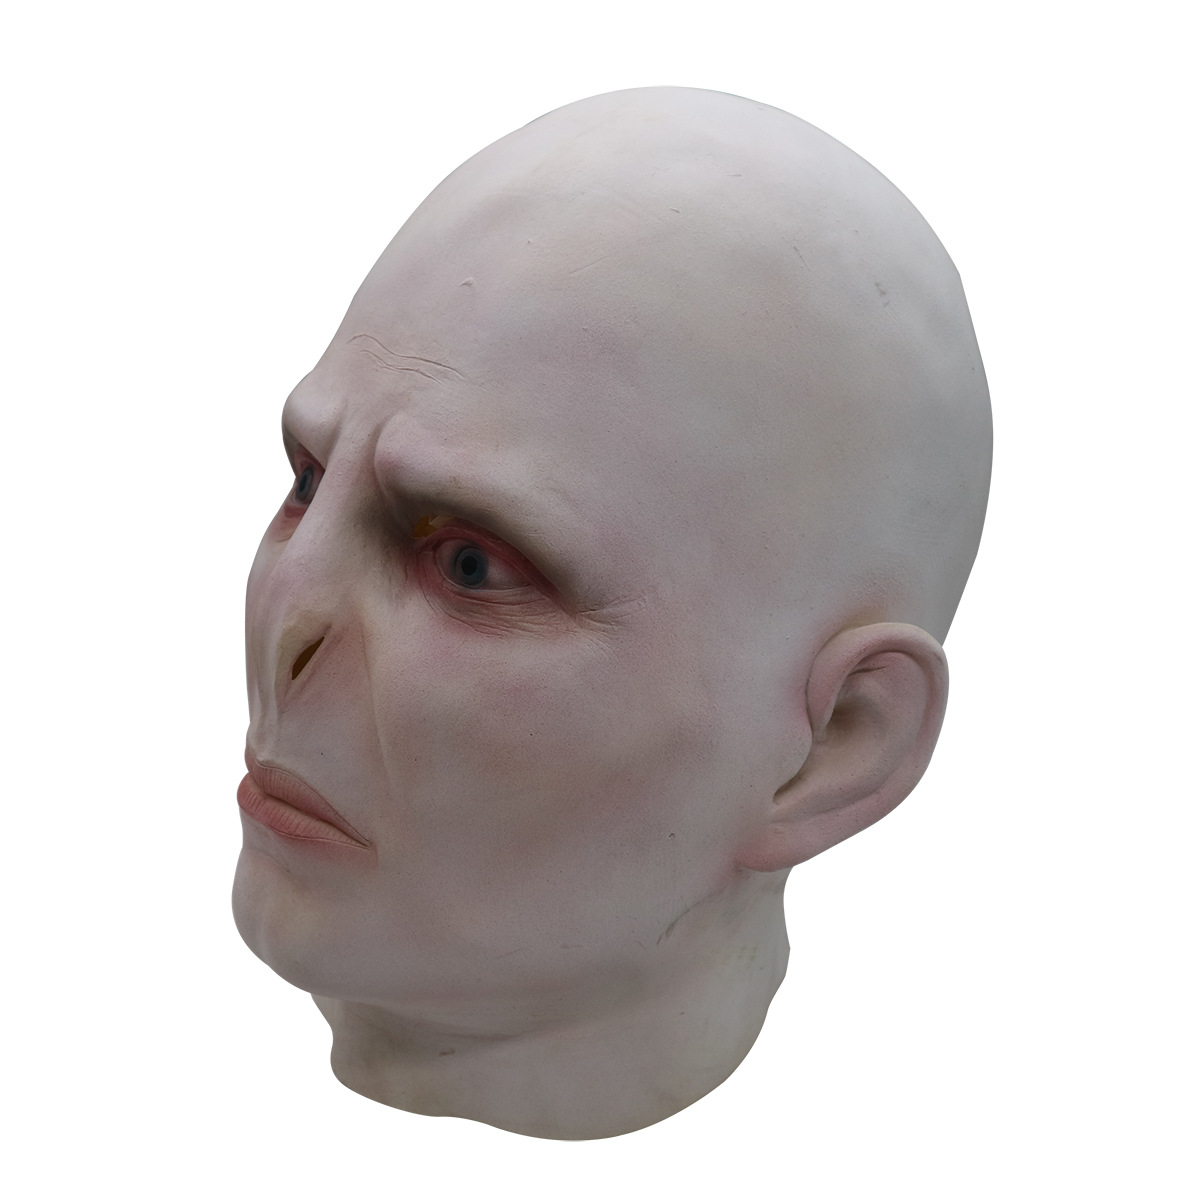 Voldemort Full Mask Cover Games Latex Scary Adult Halloween Costume Fancy Props